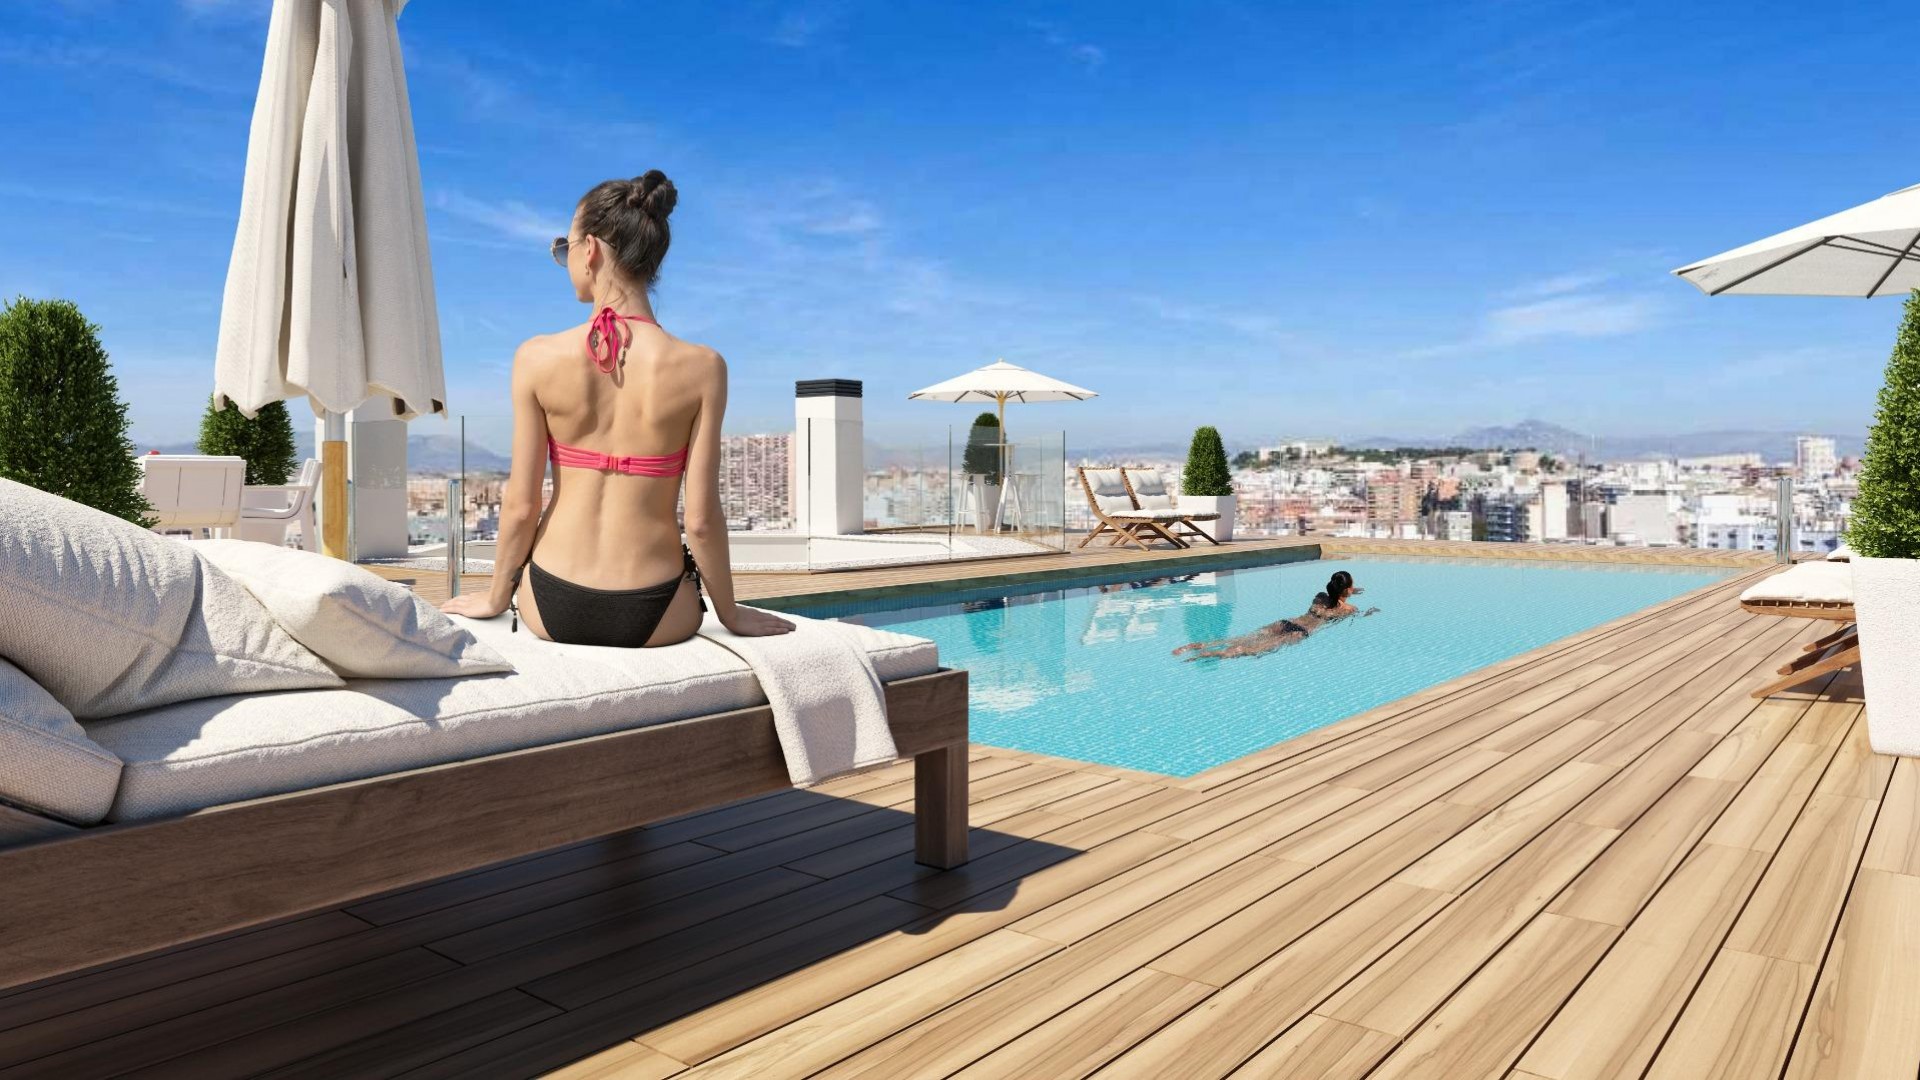 Alicante city, apartments and penthouses, 2/3/4 bedrooms in La Florida, roof terrace with swimming pool, shared garden with playground and green areas.